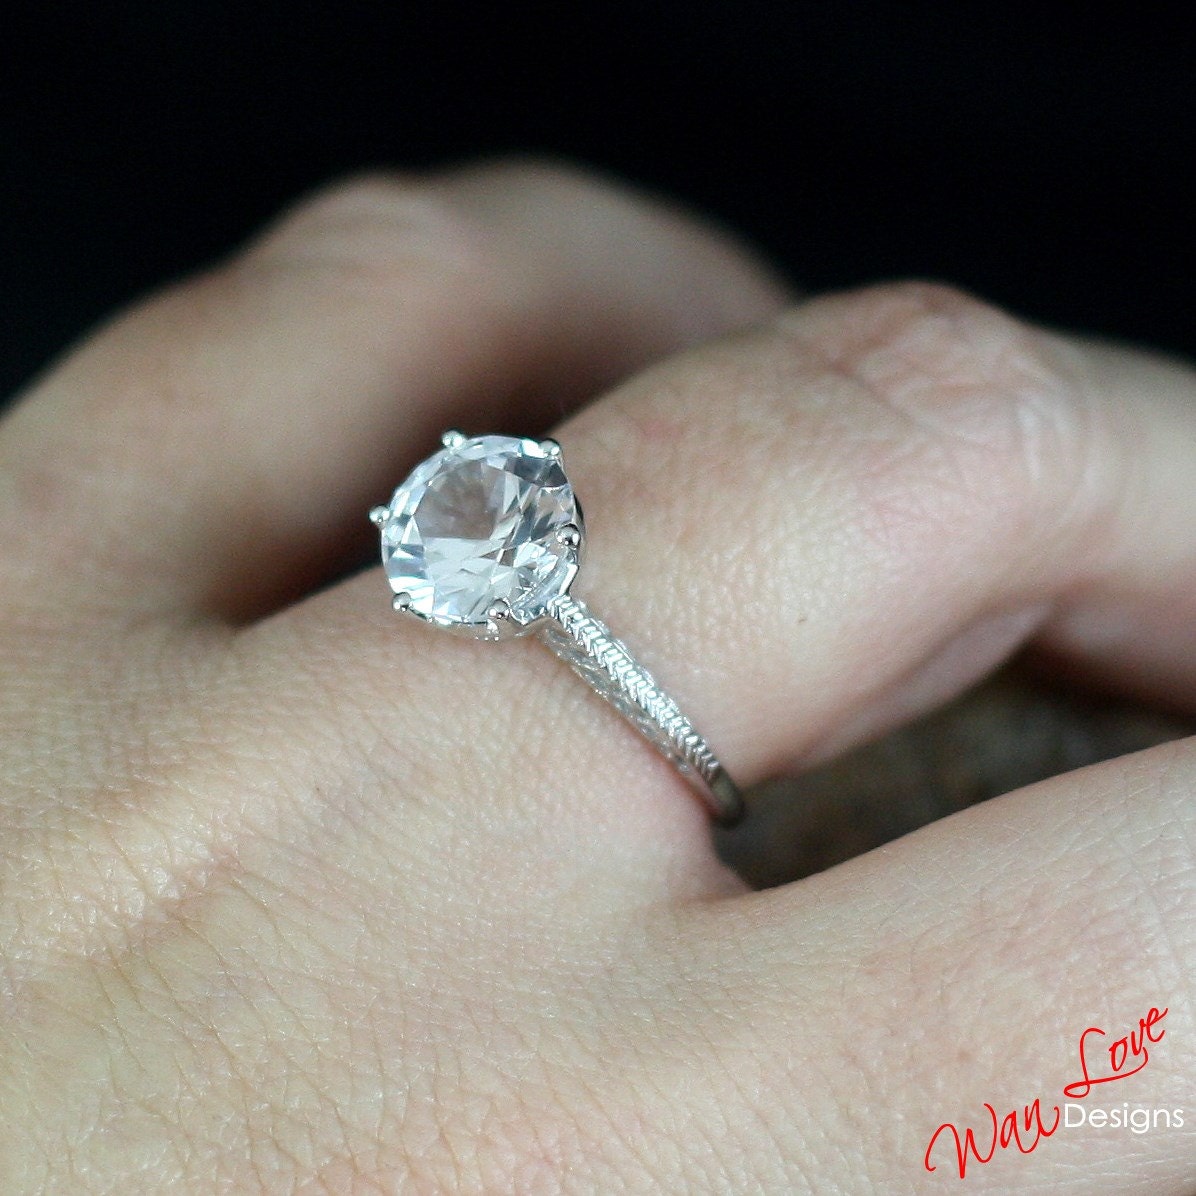 White Topaz Round Engagement Ring, Antique Filigree, Solitaire, 3ct, 9mm, Silver Rhodium, Wedding, Anniversary Gift, Ready to ship